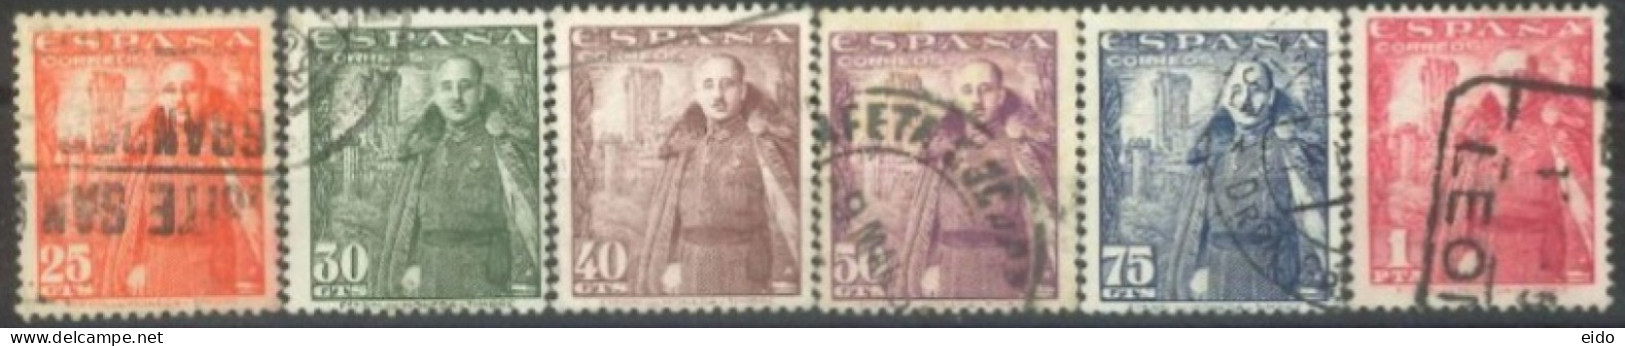 SPAIN,  1948/49, GENERAL FRANCO STAMPS SET OF 6, # 761,802,764/65,& 767/68, USED. - Used Stamps